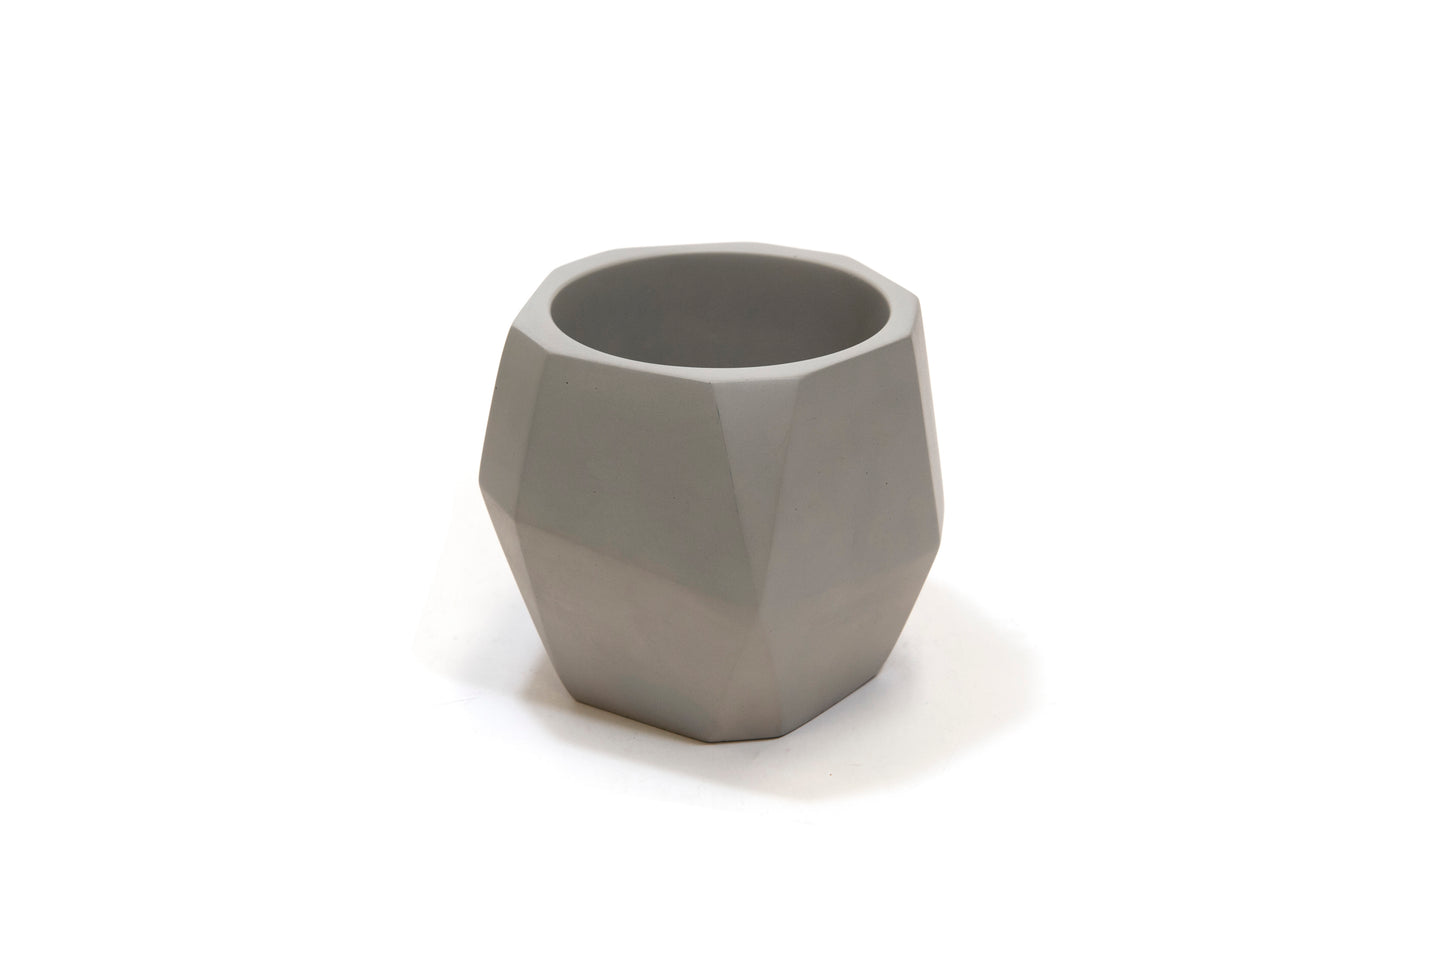 Geometric Concrete Pot | The perfect accent to set up your garden this summer. Available at Barbecues Galore: Burlington, Oakville, Etobicoke & Calgary